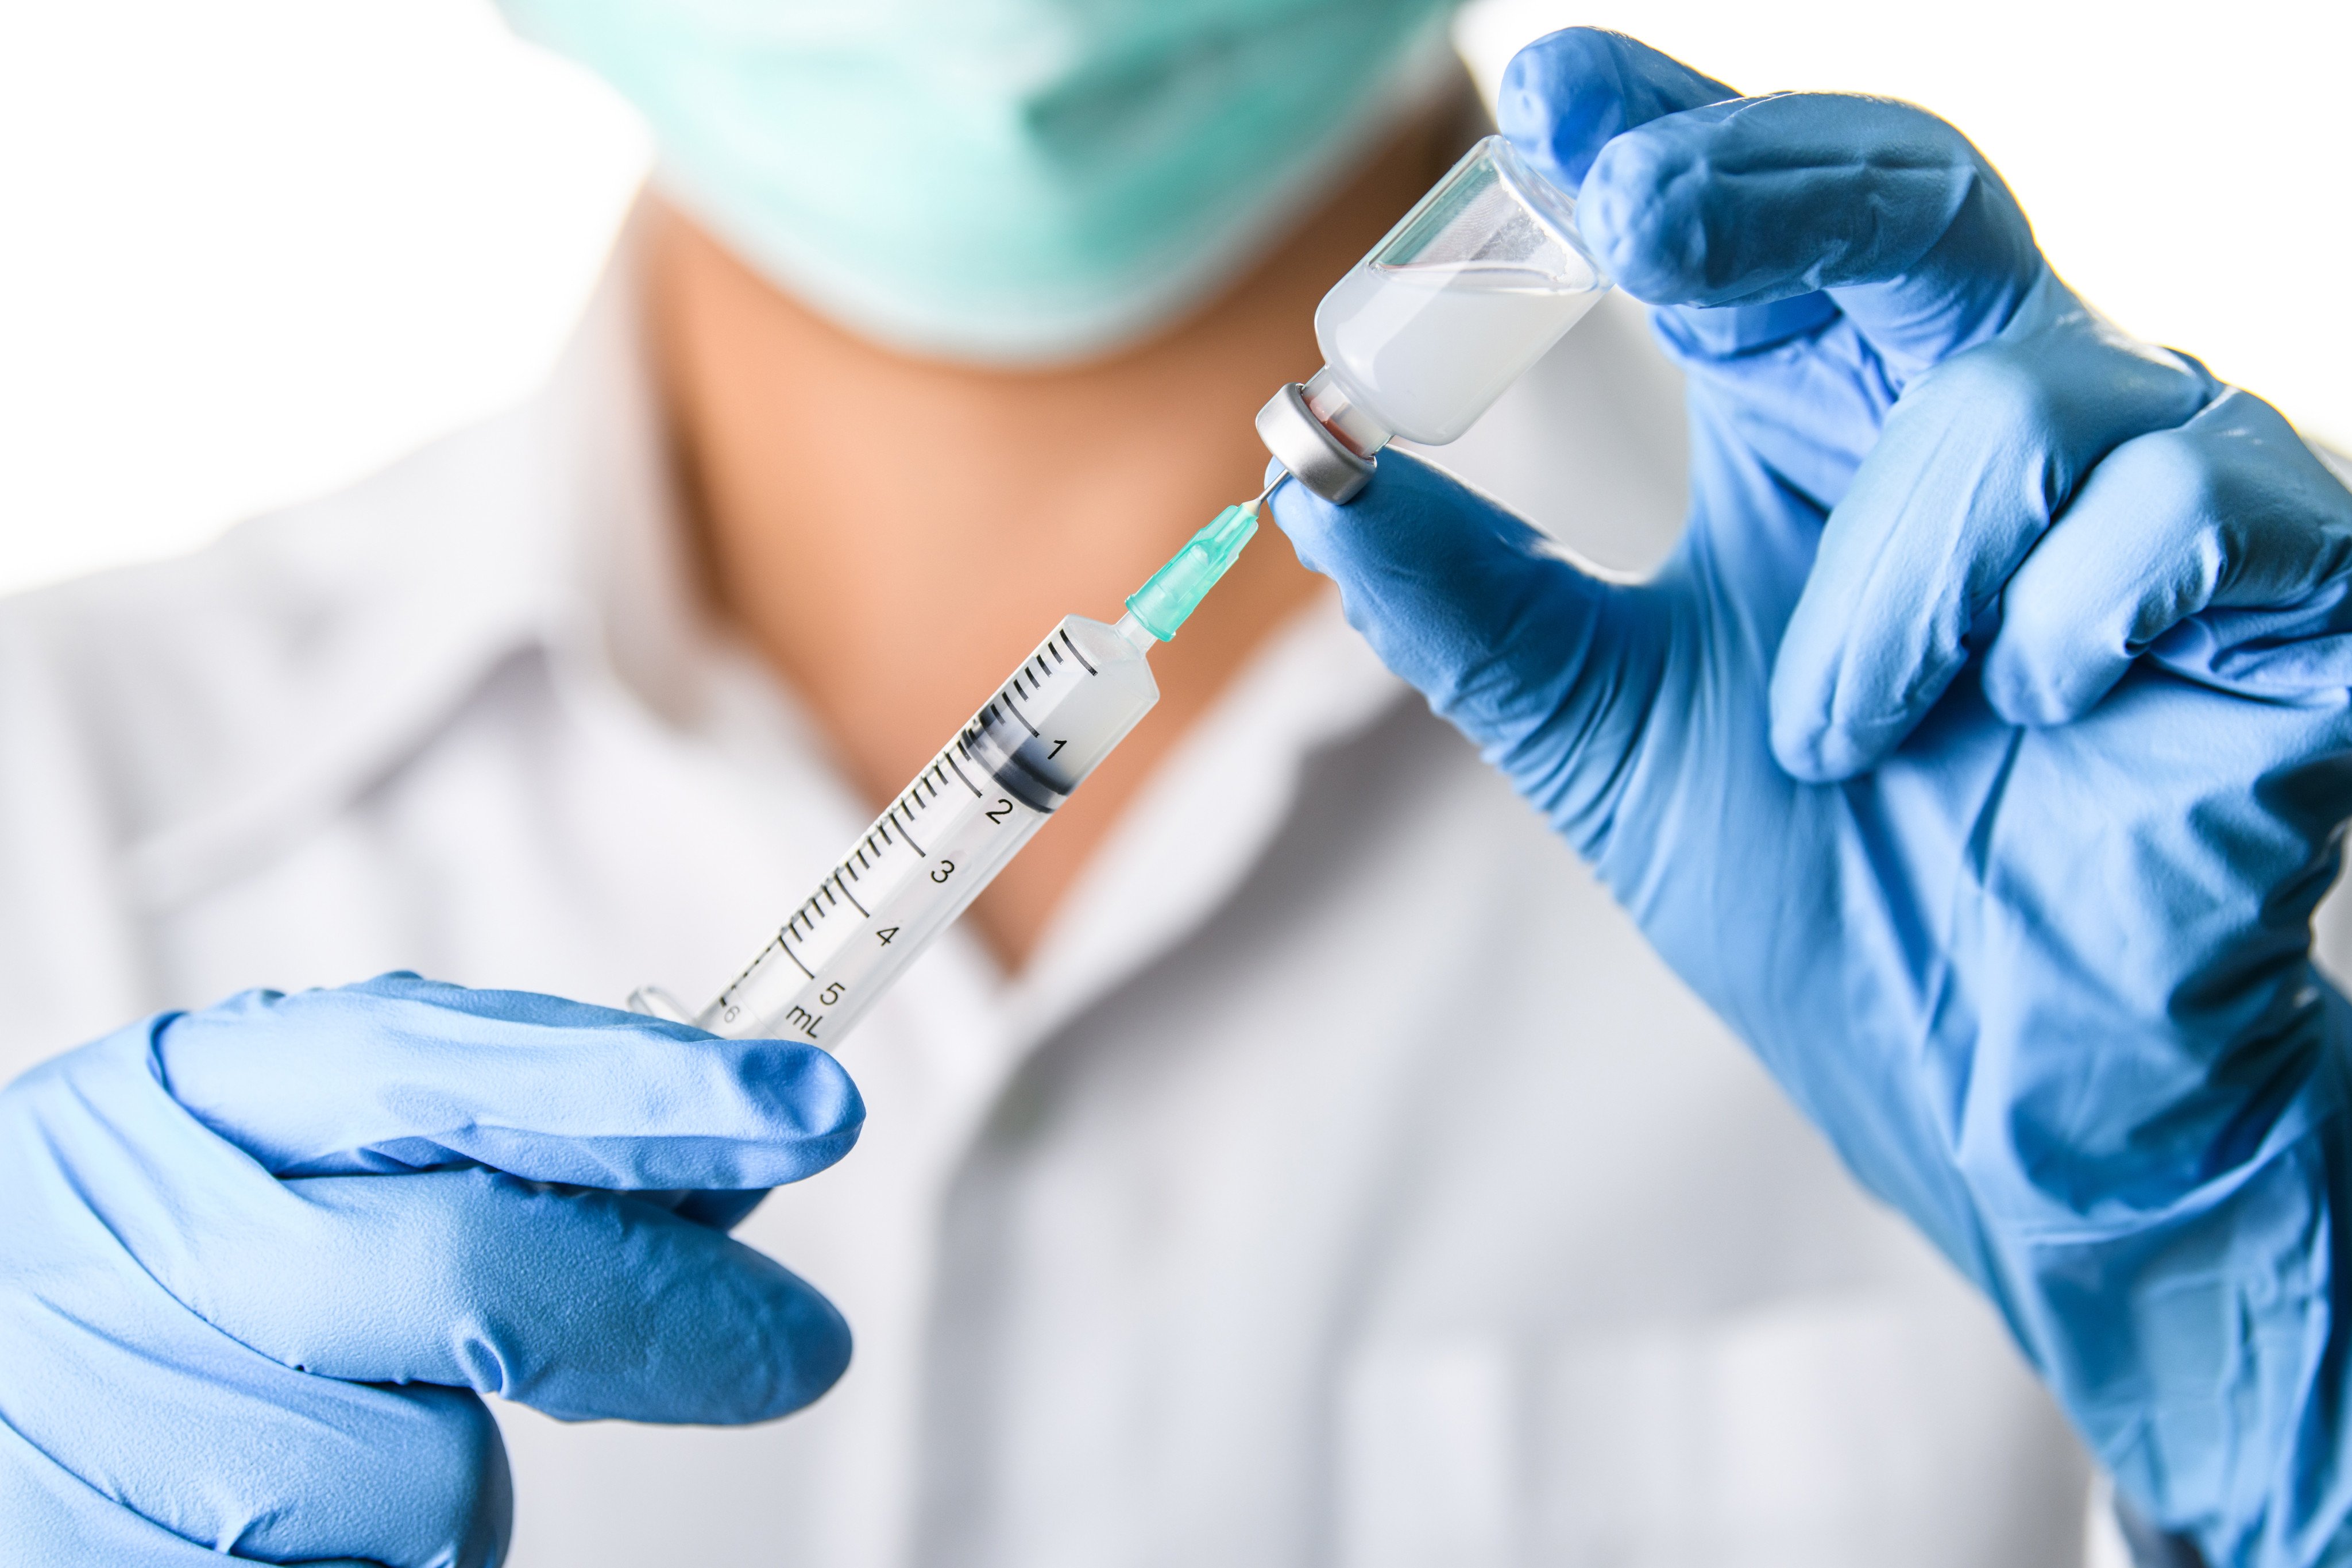 Central England has a measles outbreak and officials are concerned it will spread amid a low vaccine uptake. A major global spike in measles and deaths has occurred, the WHO said. Photo: Shutterstock